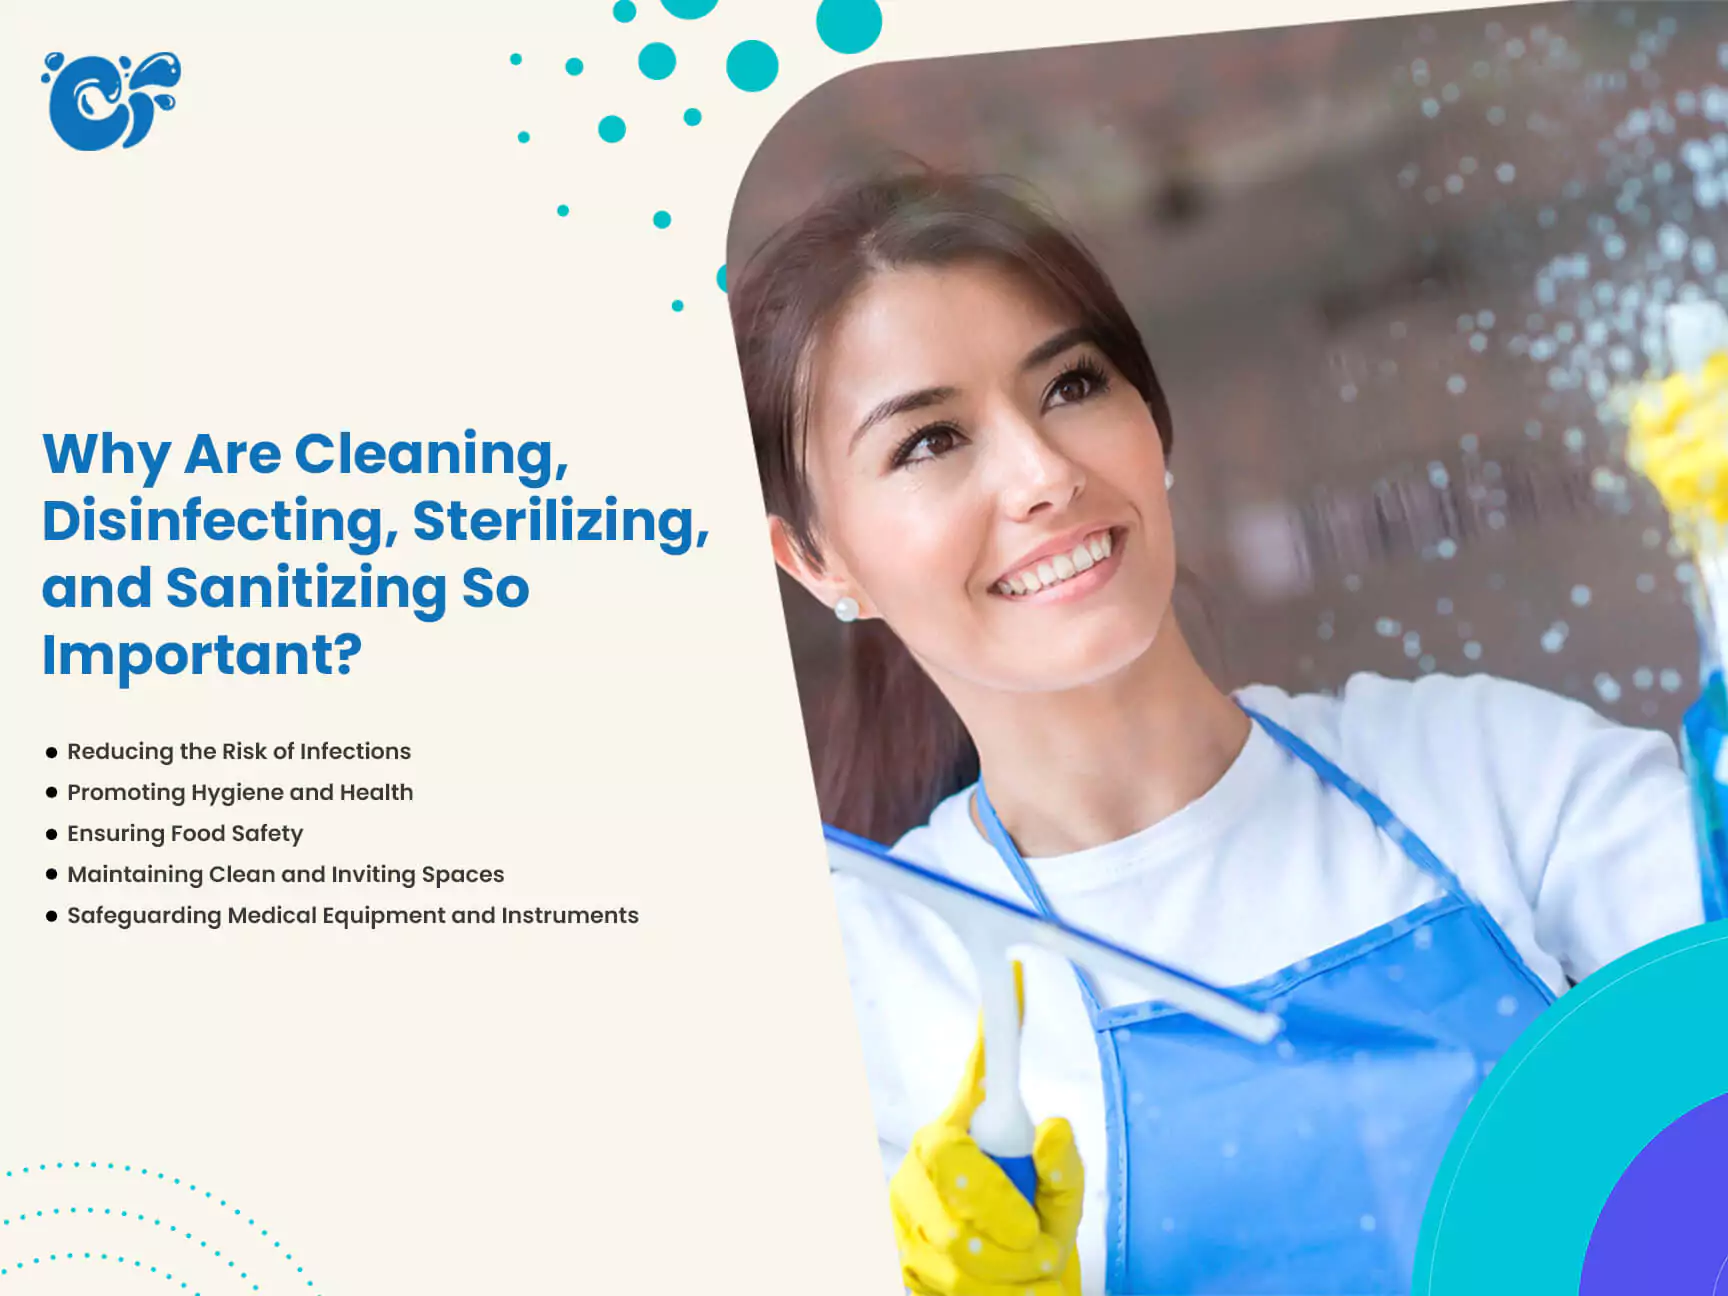 Why Are Cleaning, Disinfecting, Sterilizing, and Sanitizing So Important? 